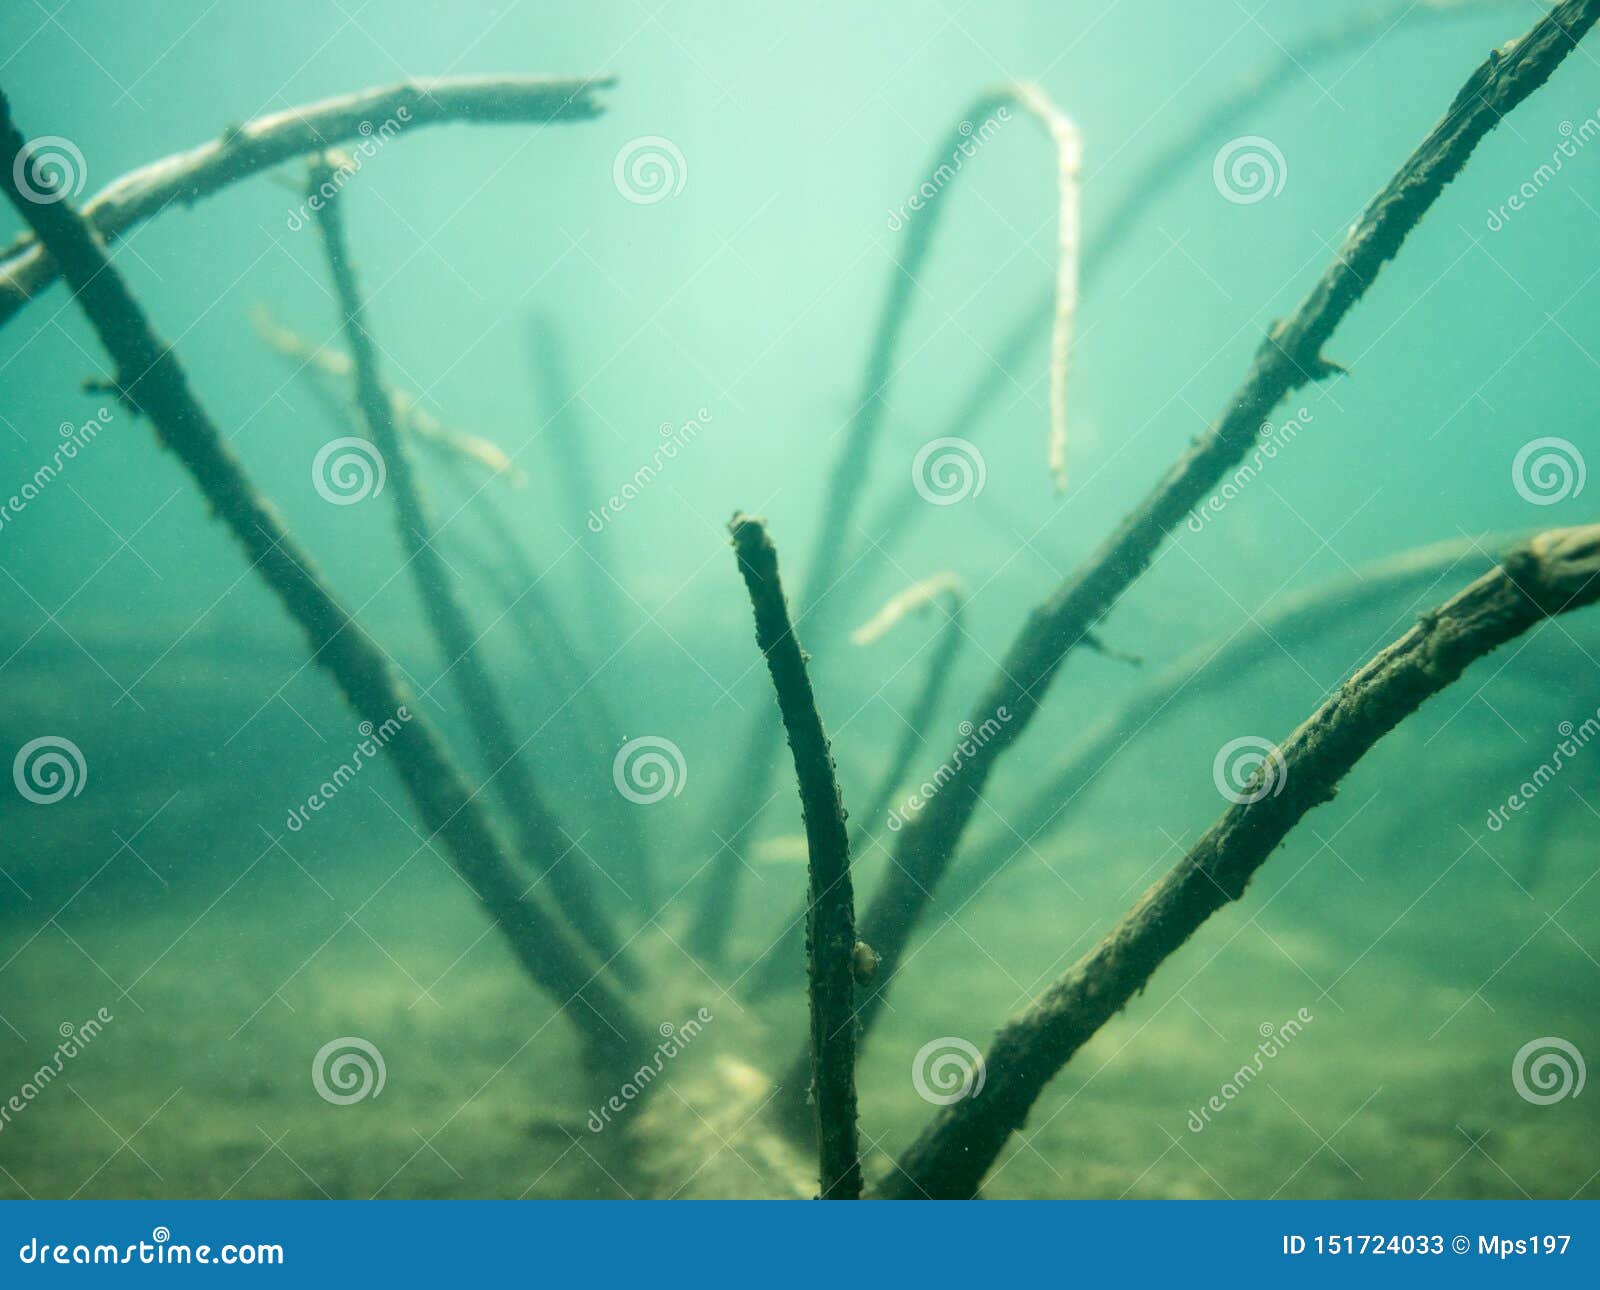 Underwater Branches of Fallen Tree in Lake Bottom Stock Image - Image